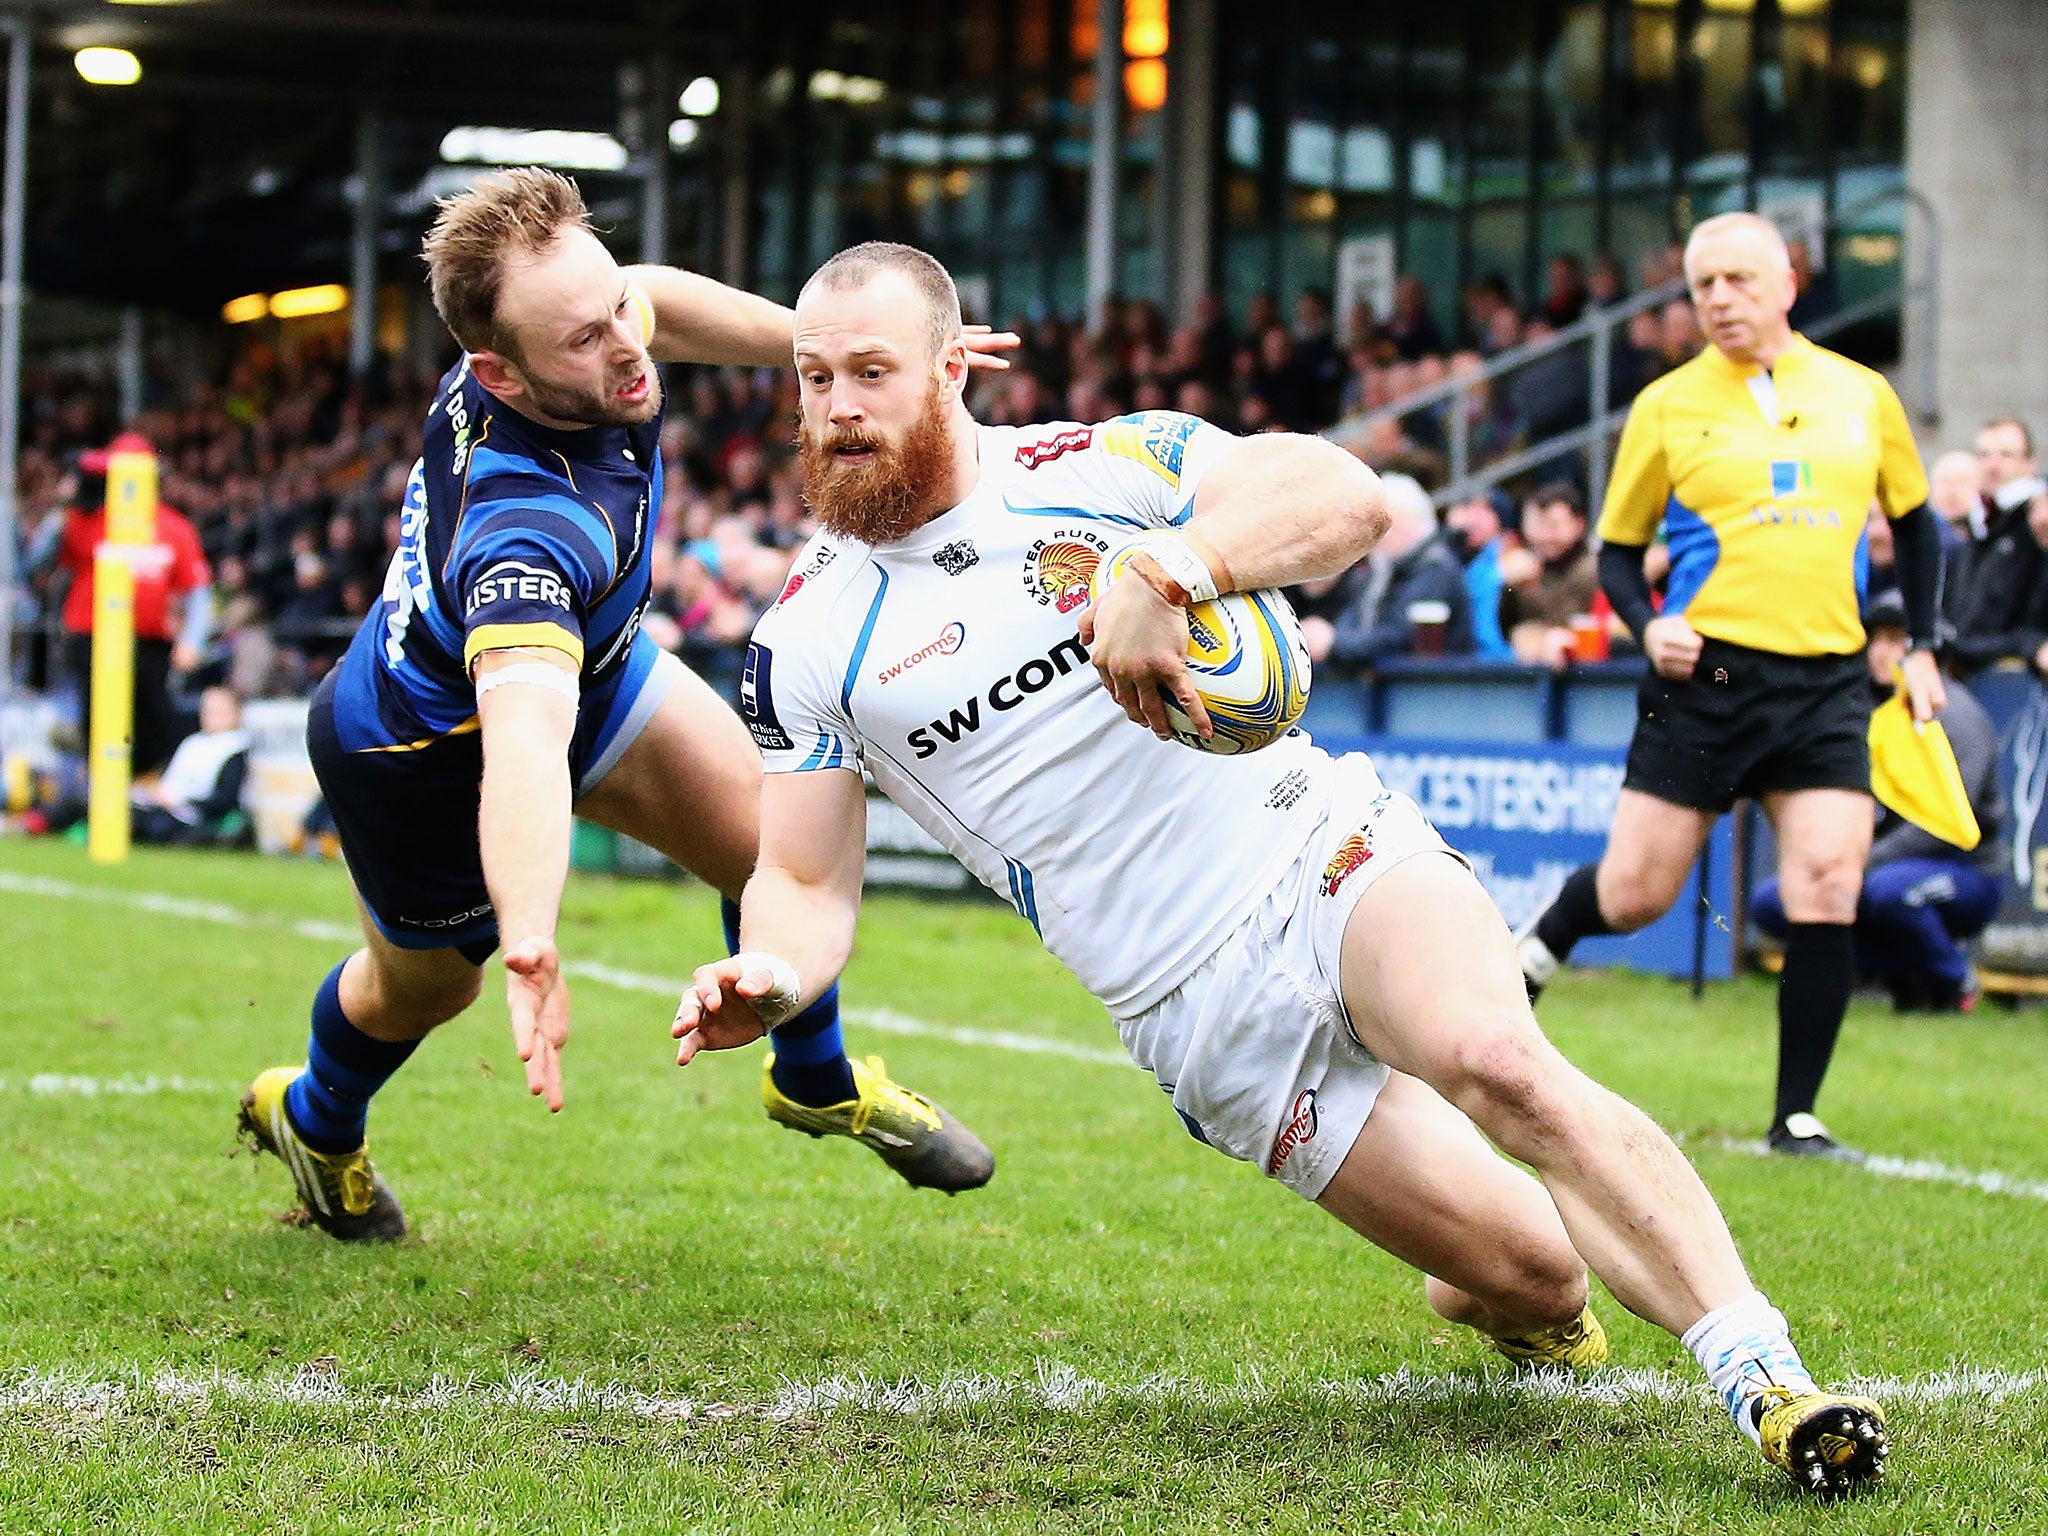 James Short crosses the line to put Exeter ahead after a bad blunder by Worcester